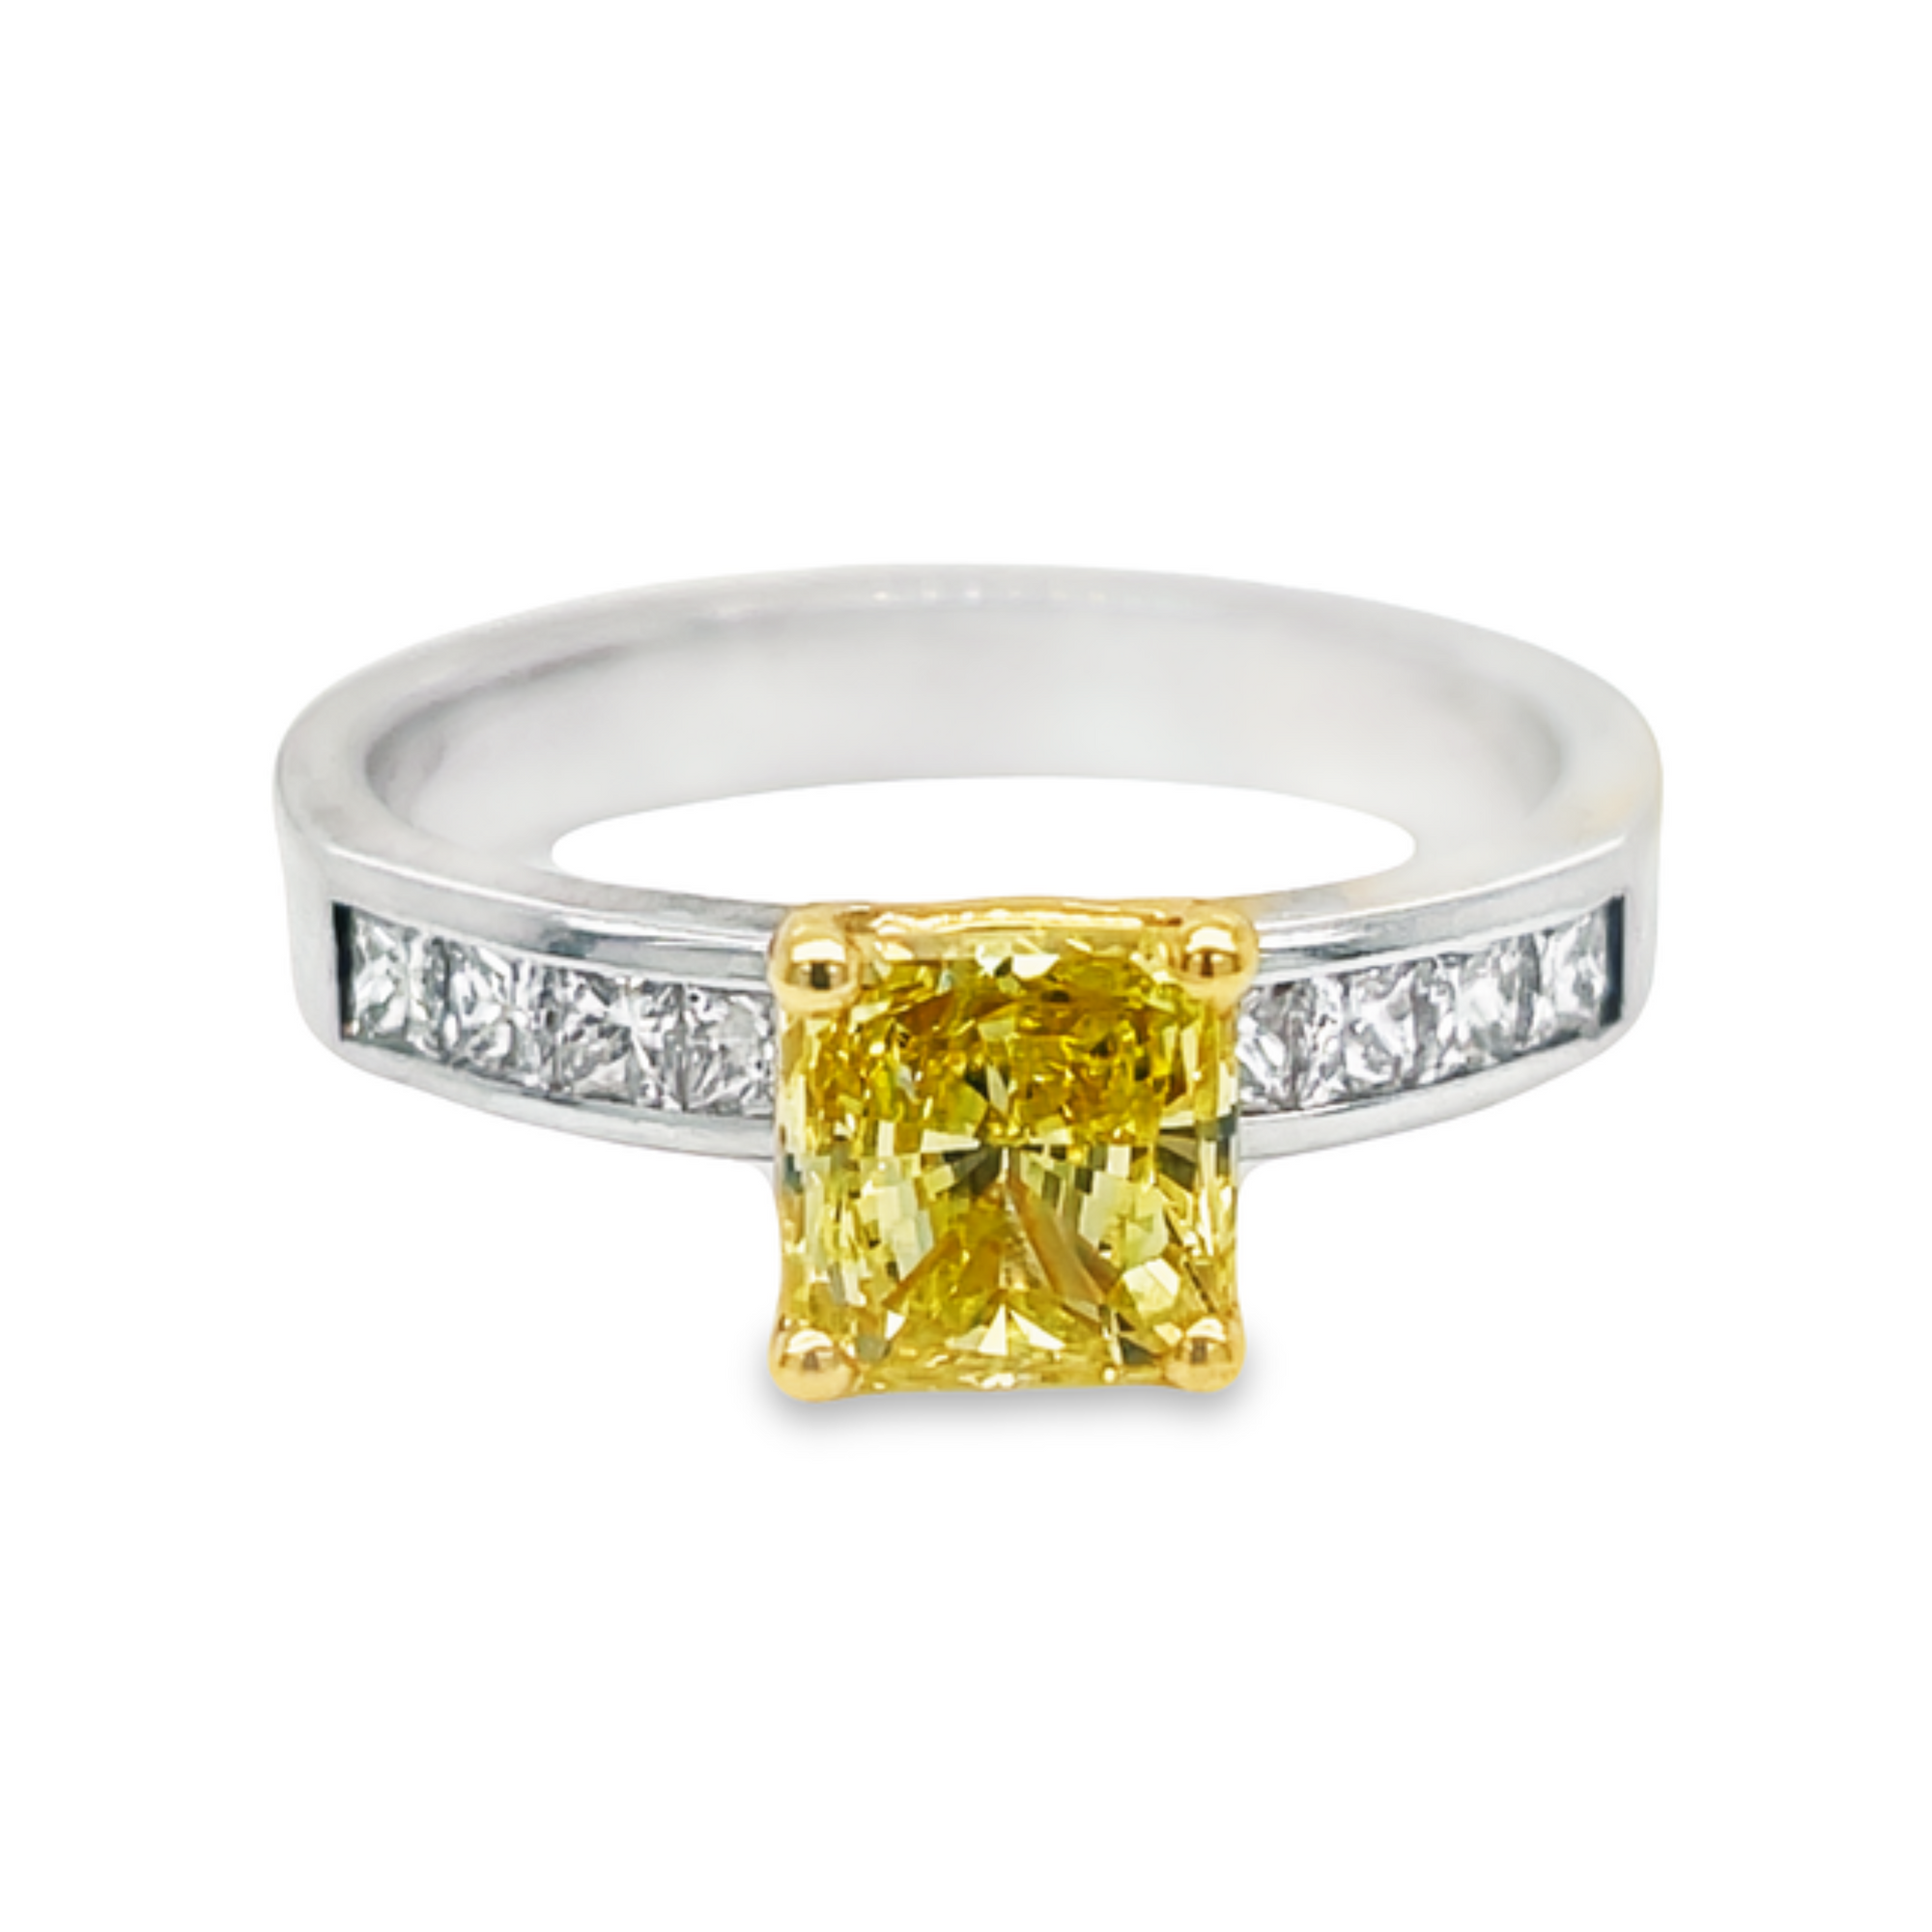 2.36 ct Yellow Diamond Ring with Wide Band in 18k Yellow Gold | Jewelsmith